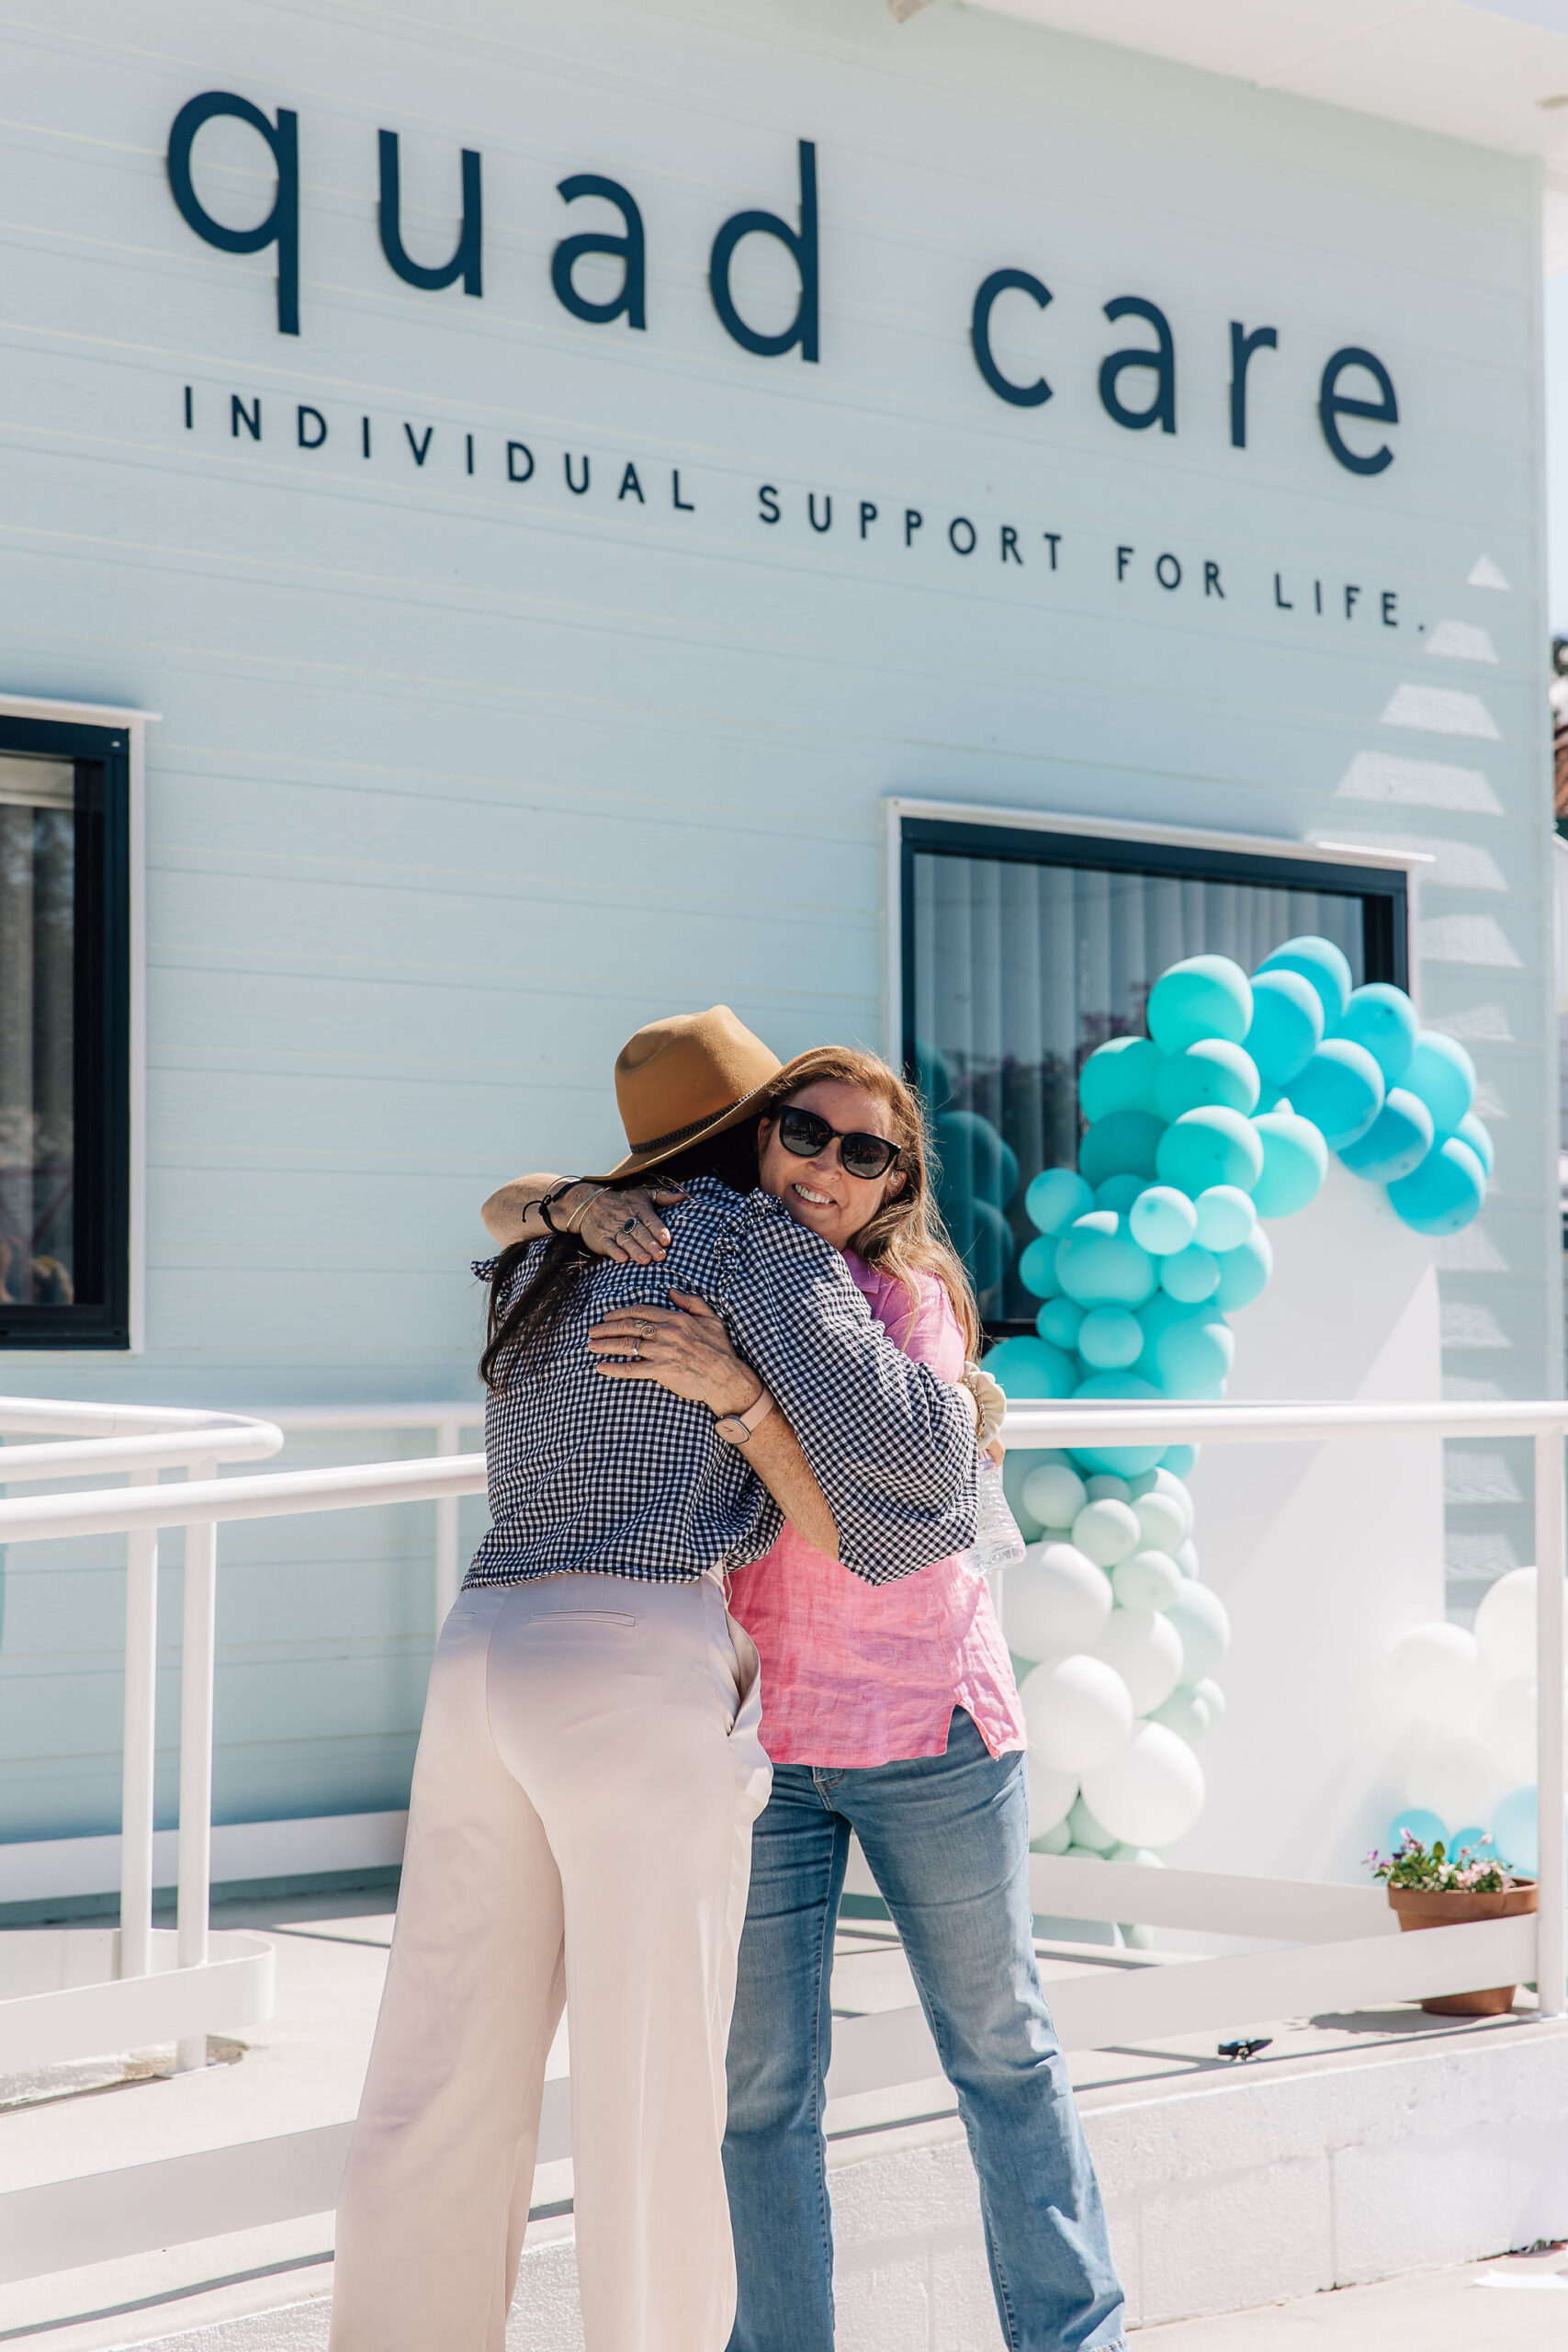 the owner Dani and her mother in law hugging at the front of the community hub on open day